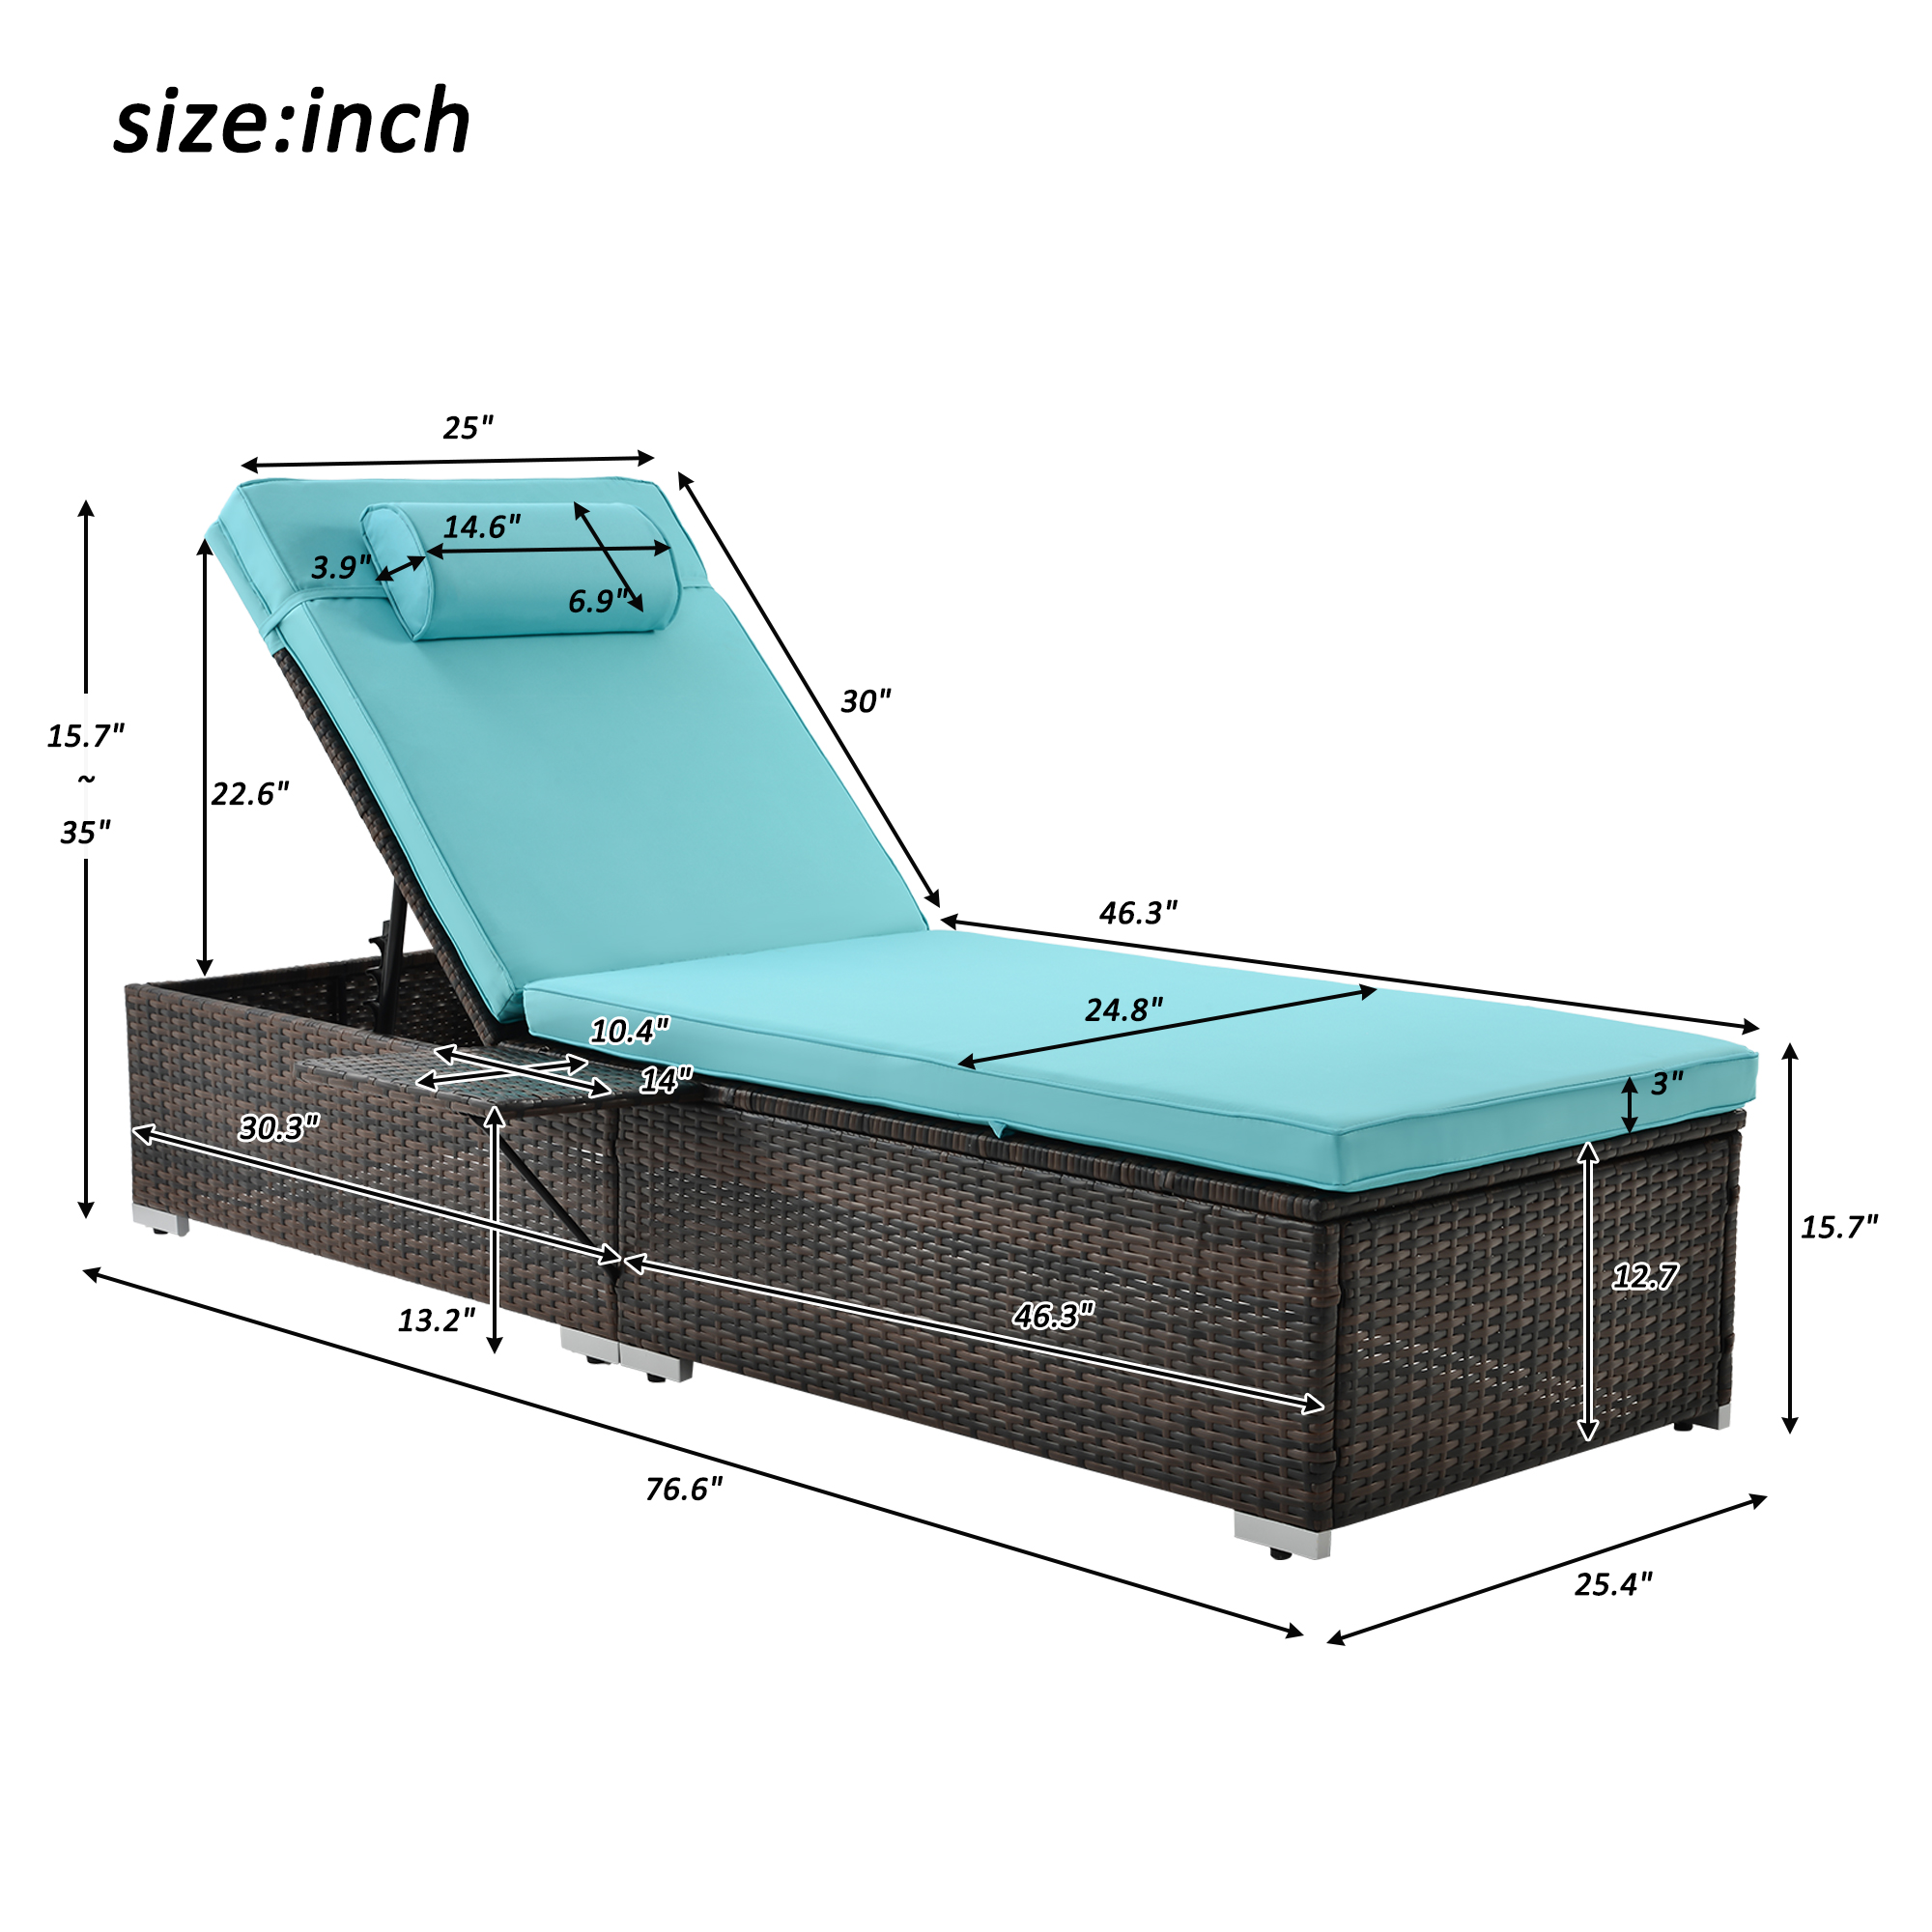 2 Pieces Patio Chaise Lounge Chair Set, PE Rattan Chaise Lounge with Side Table, Sun Chaise Lounge Furniture, Pool Furniture Sunbed with Cushion, Tanning Lounge Chair with 5 Adjustable Positions, B381 - image 4 of 8